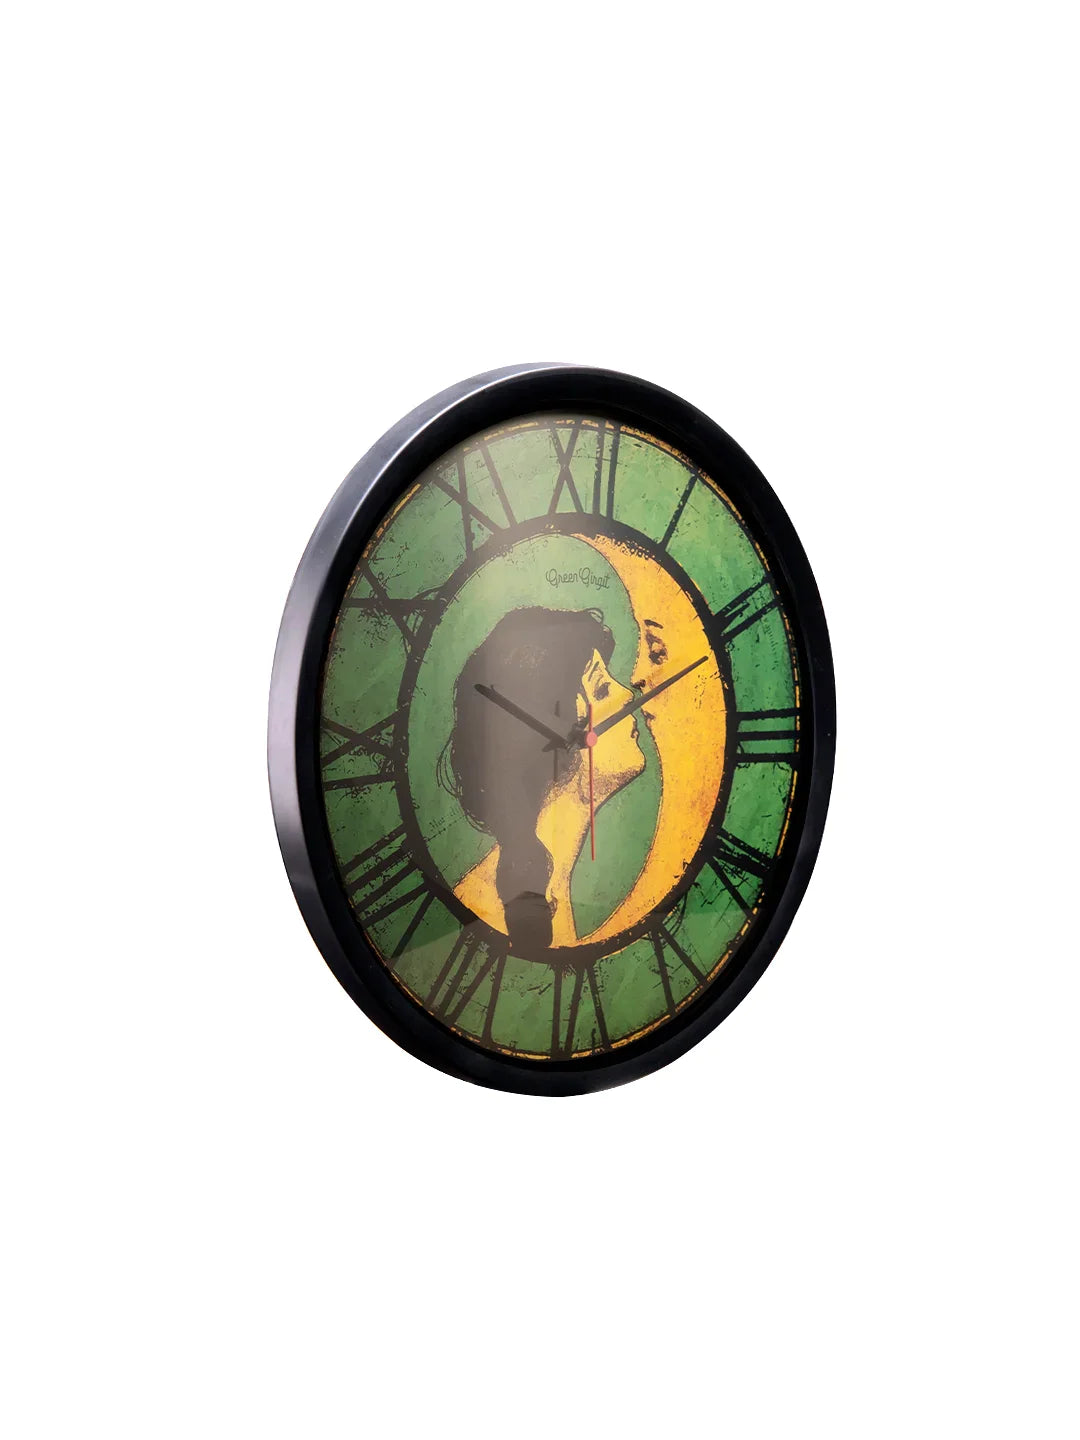 Moonkiss Multicolor 13.5 Inch Plastic Analog Wall Clock